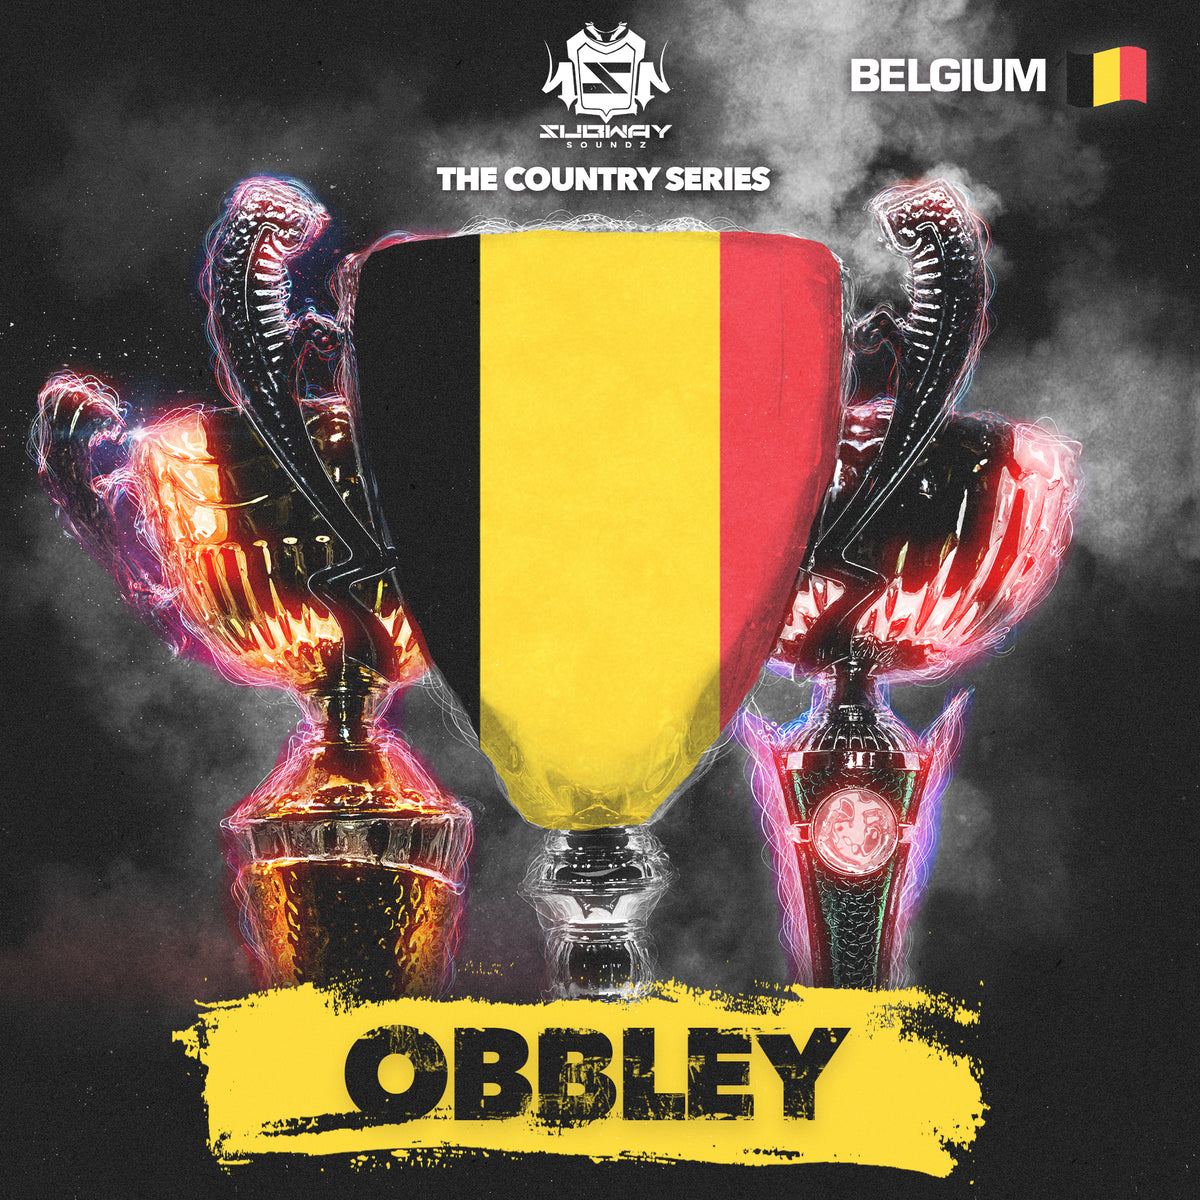 SSLD 121 - The Country Series - Obbley 'Belgium'